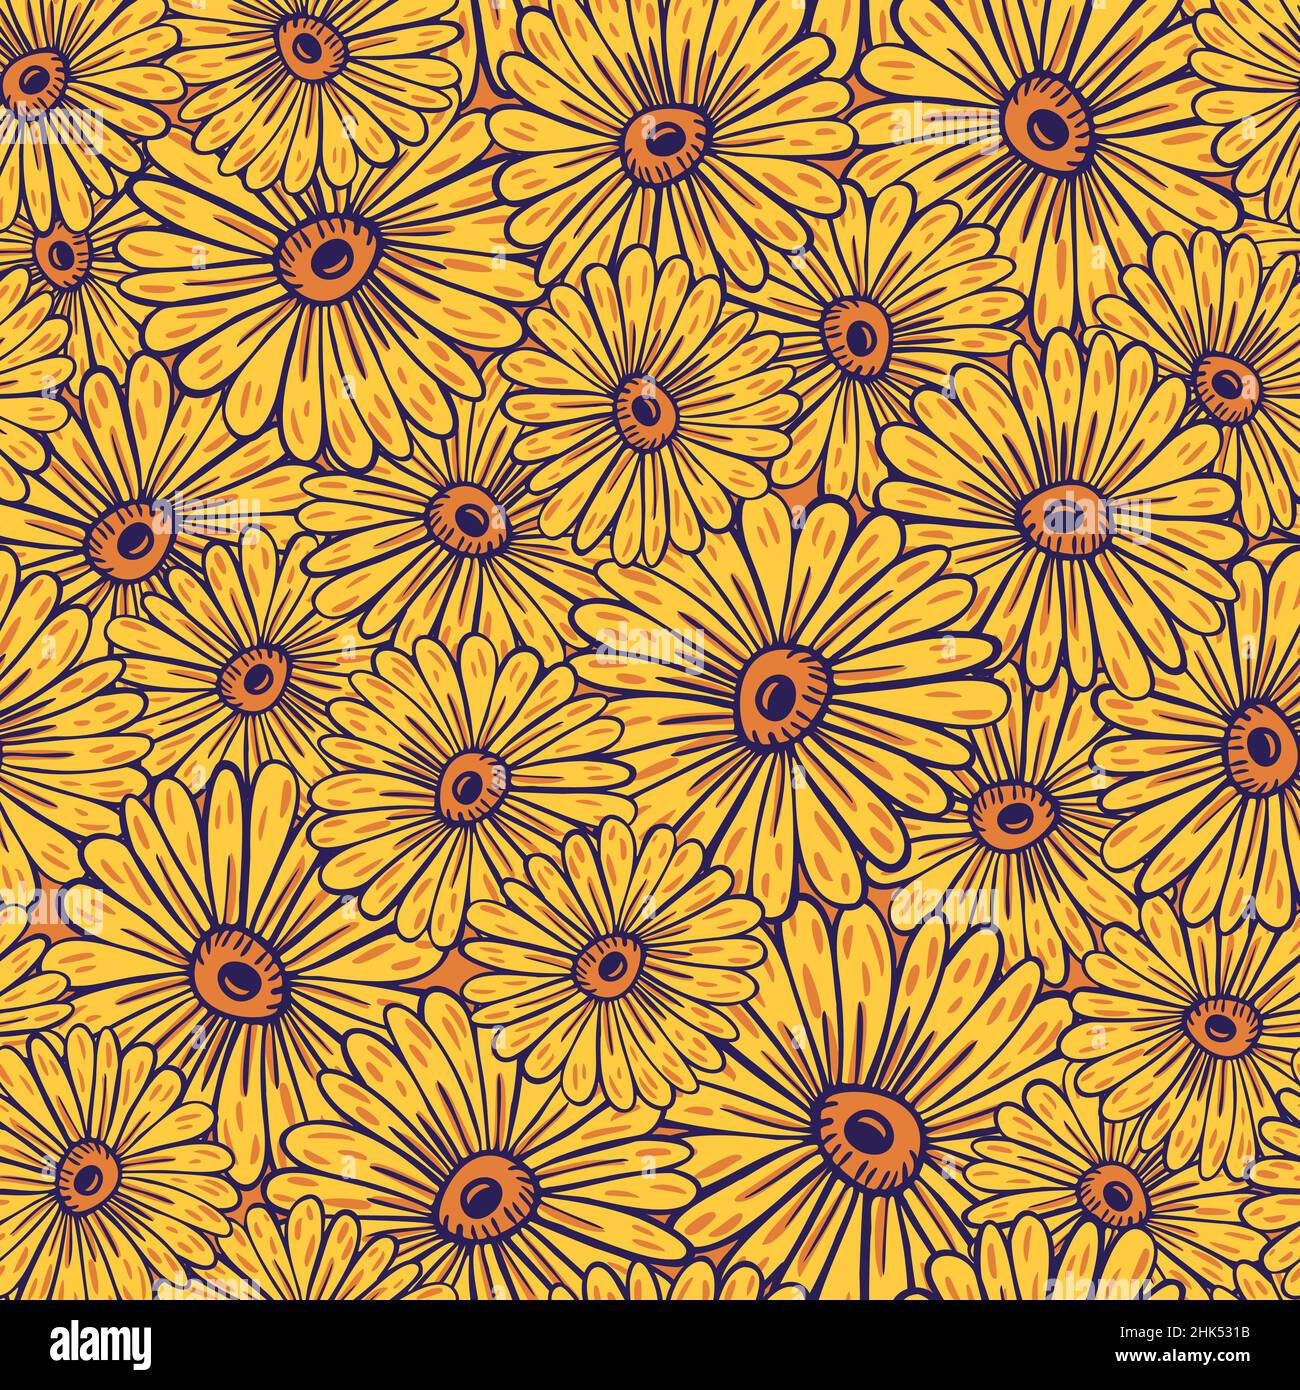 Summer style seamless pattern with yellow random sunflowers elements print. Decorative bloom artwork. Vector illustration for seasonal textile prints, Stock Vector